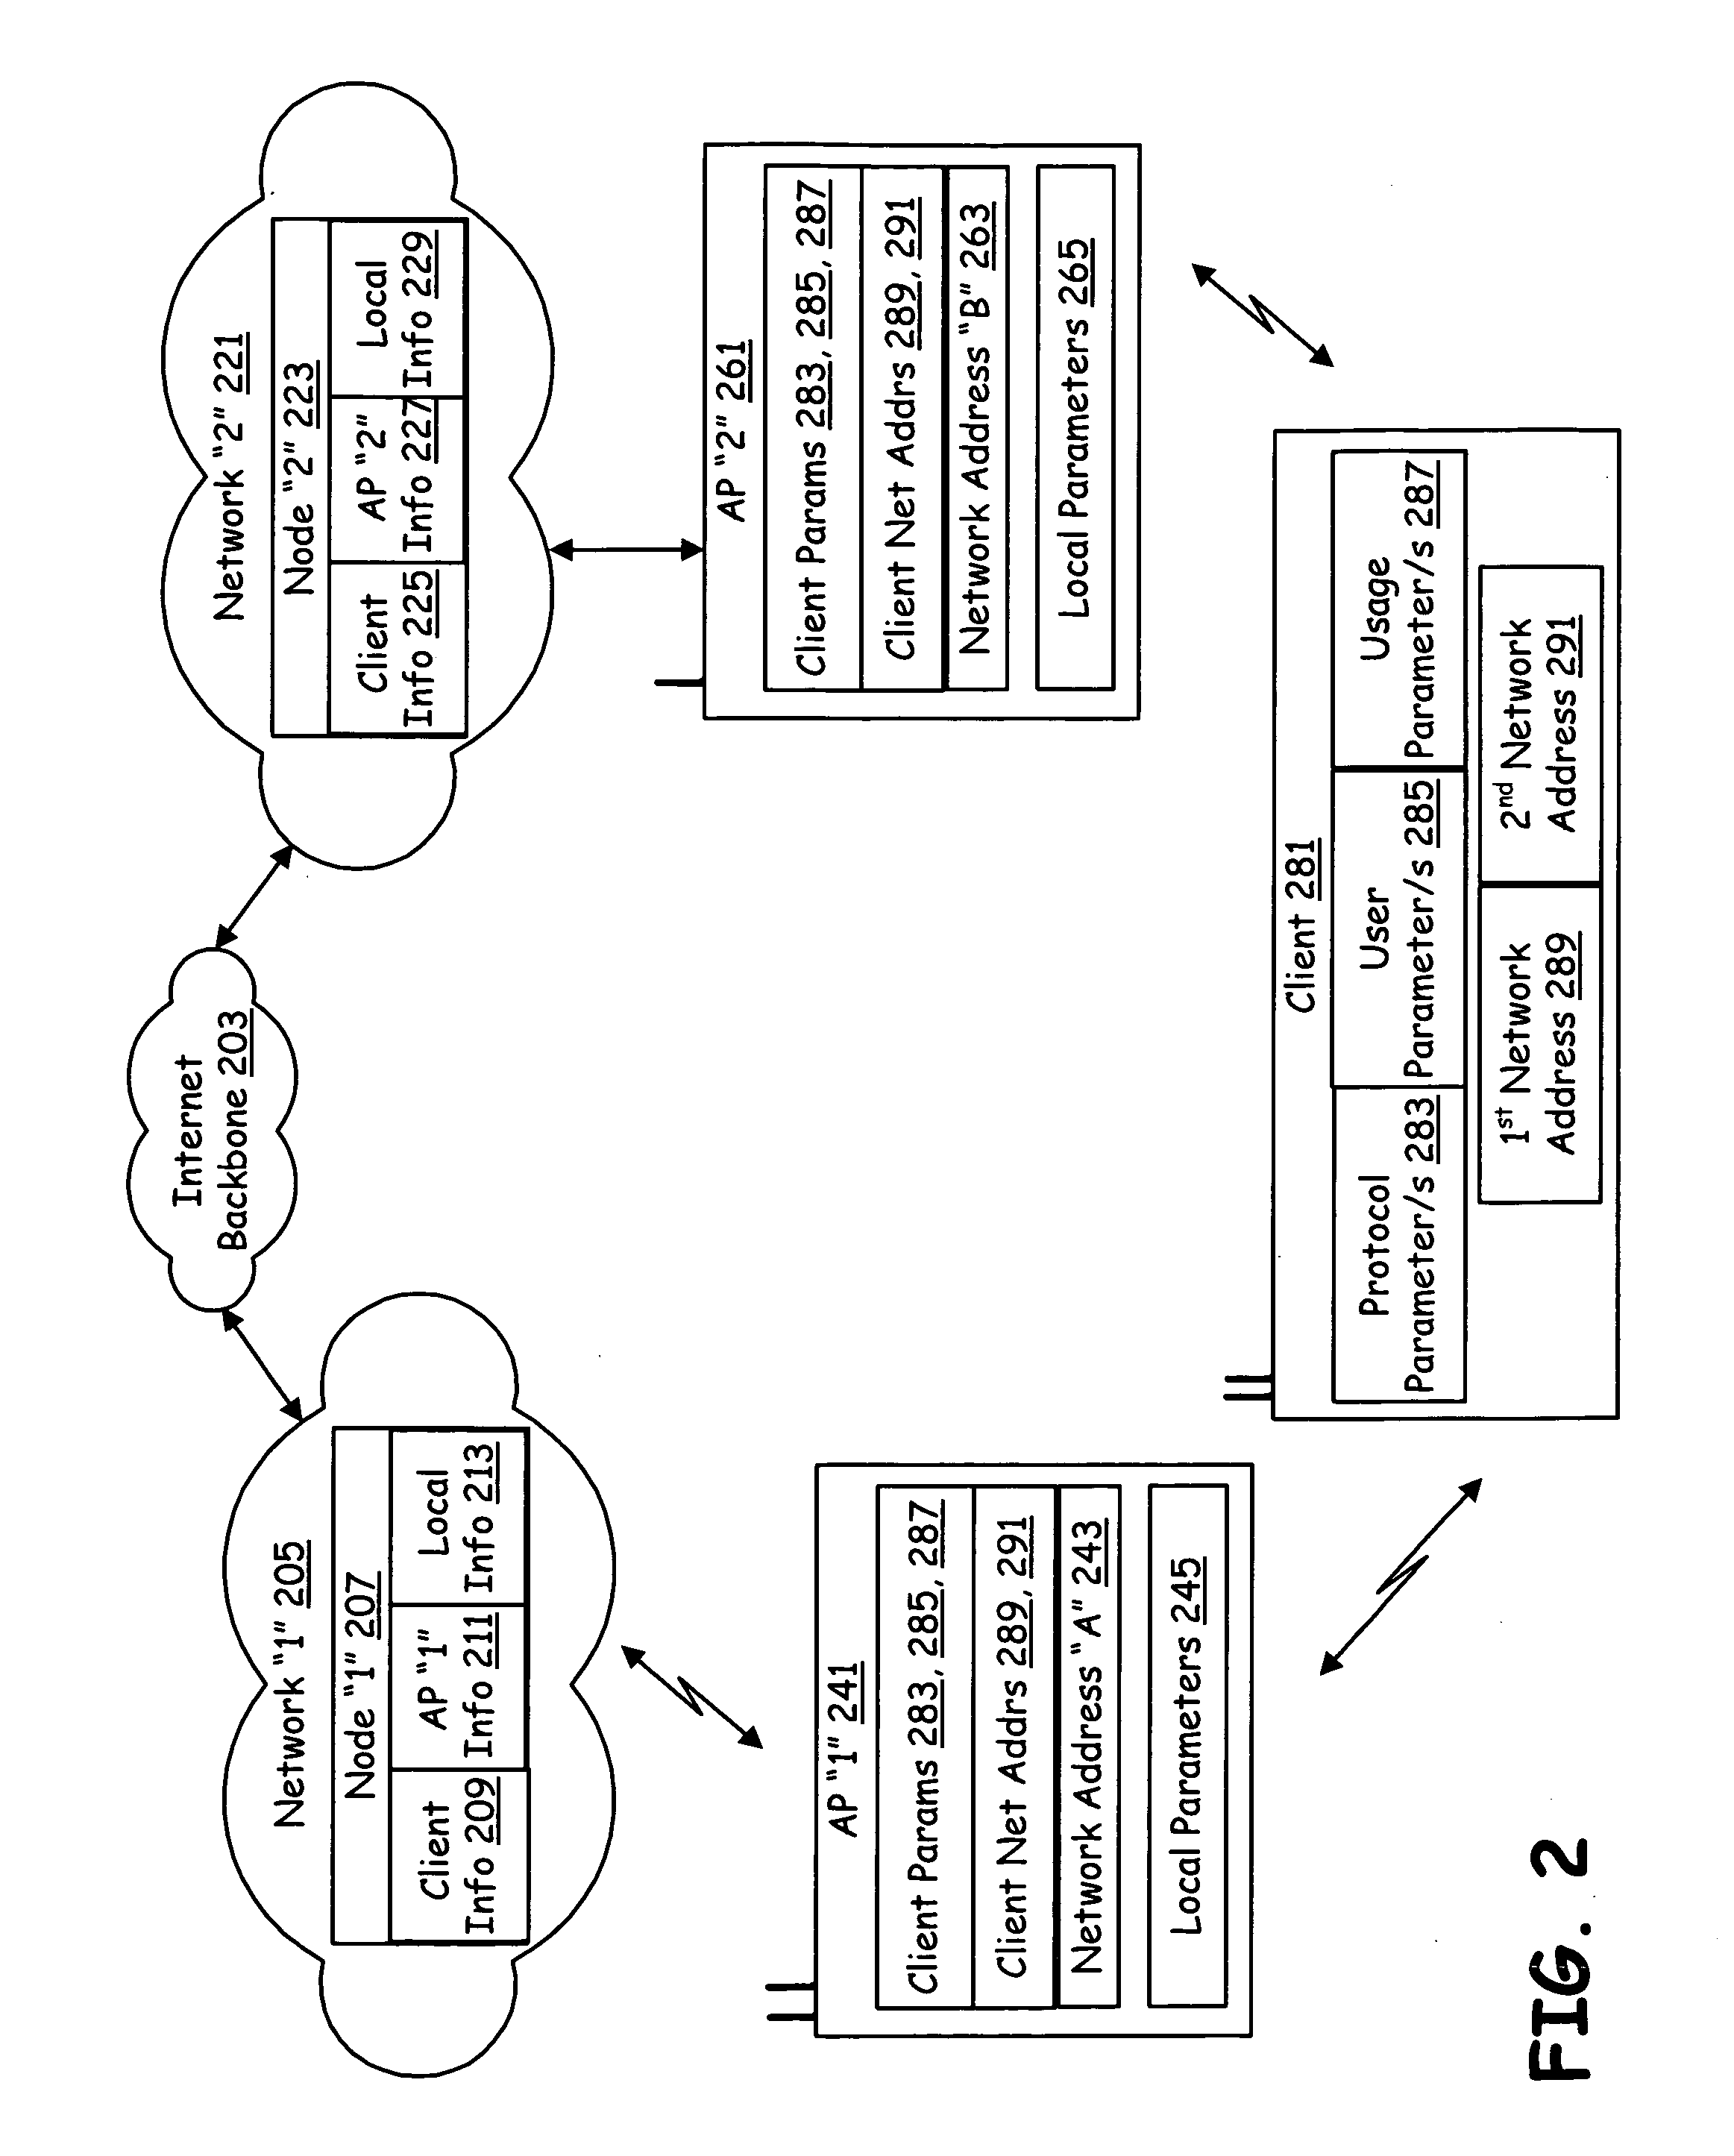 Access point supporting direct and indirect downstream delivery based on communication characteristics